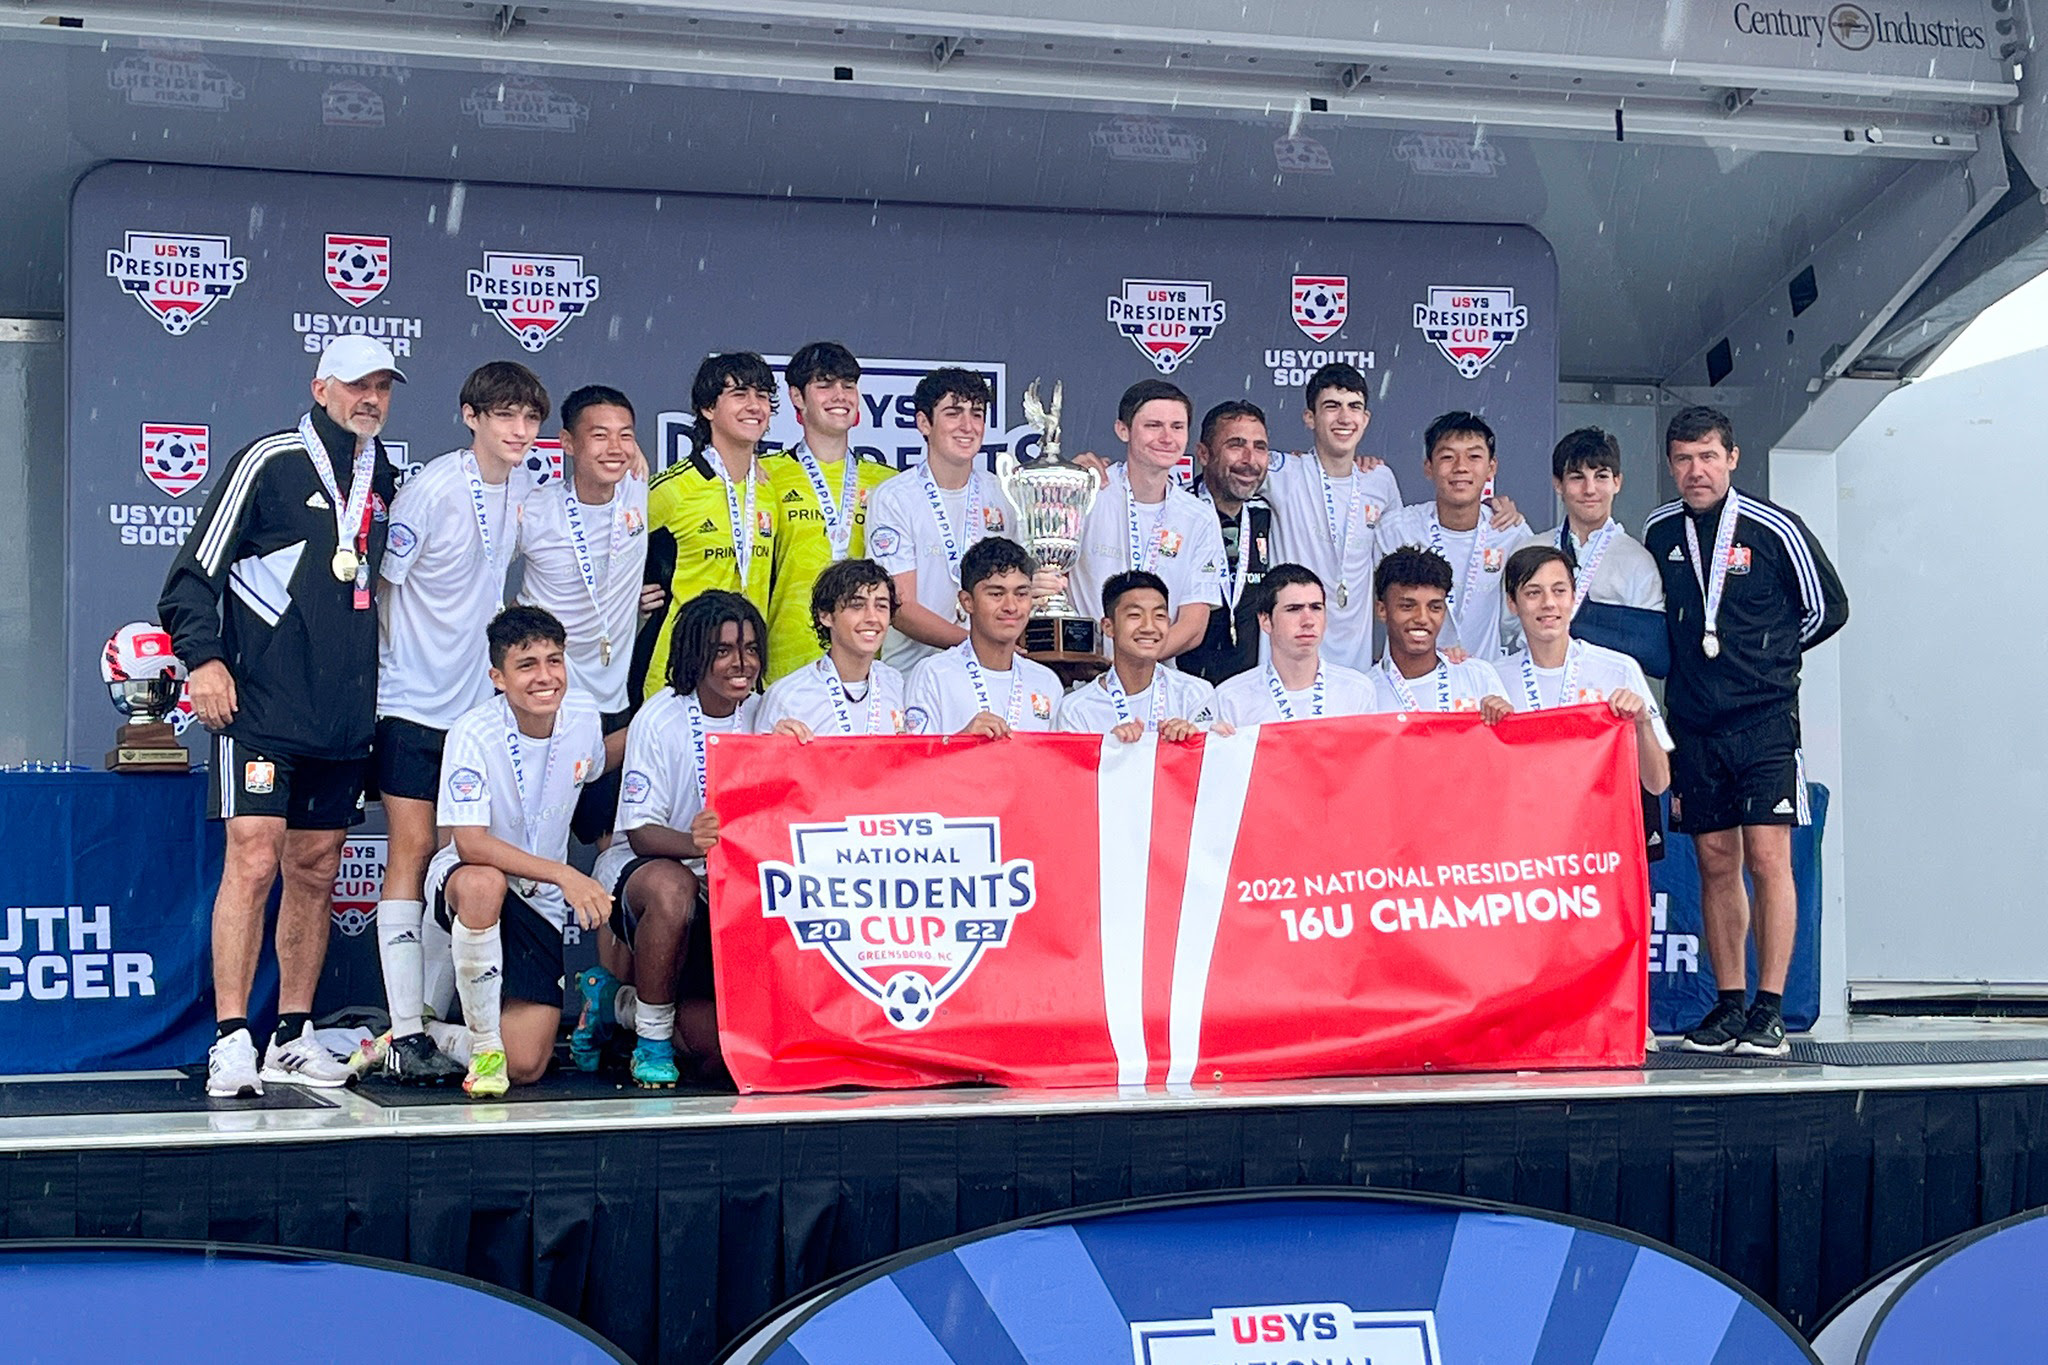 Princeton youth soccer team takes home gold during 2022 US Youth Soccer